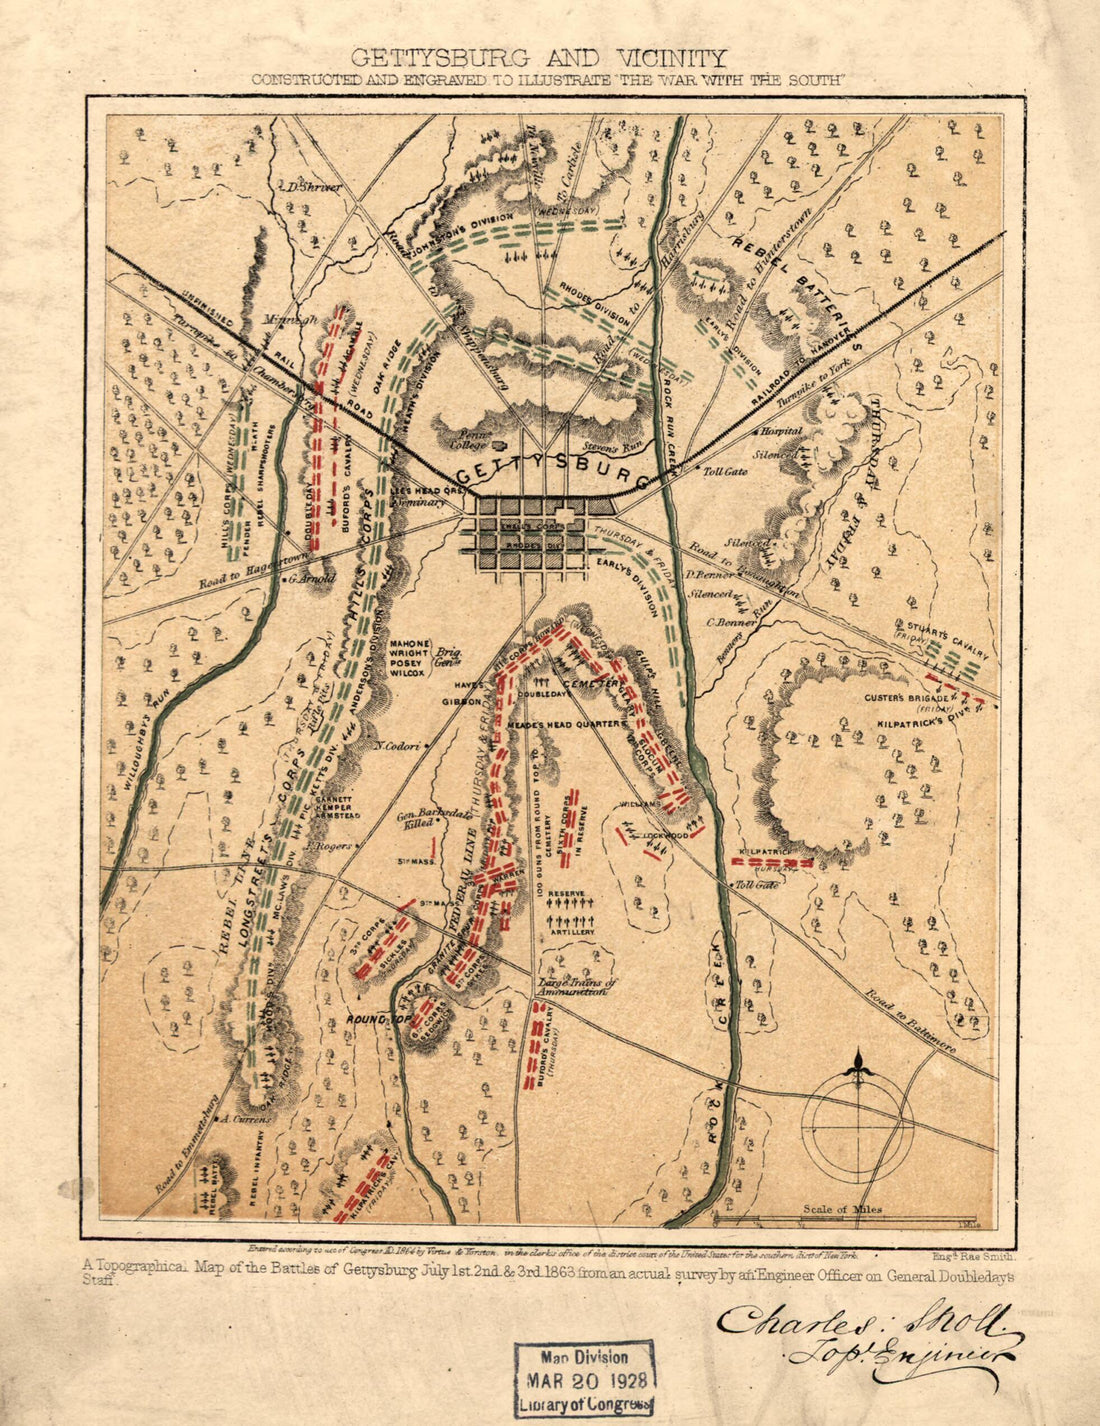 This old map of Gettysburg and Vicinity. Constructed and Engraved to Illustrate The War With the South from 1863 was created by Charles Sholl in 1863